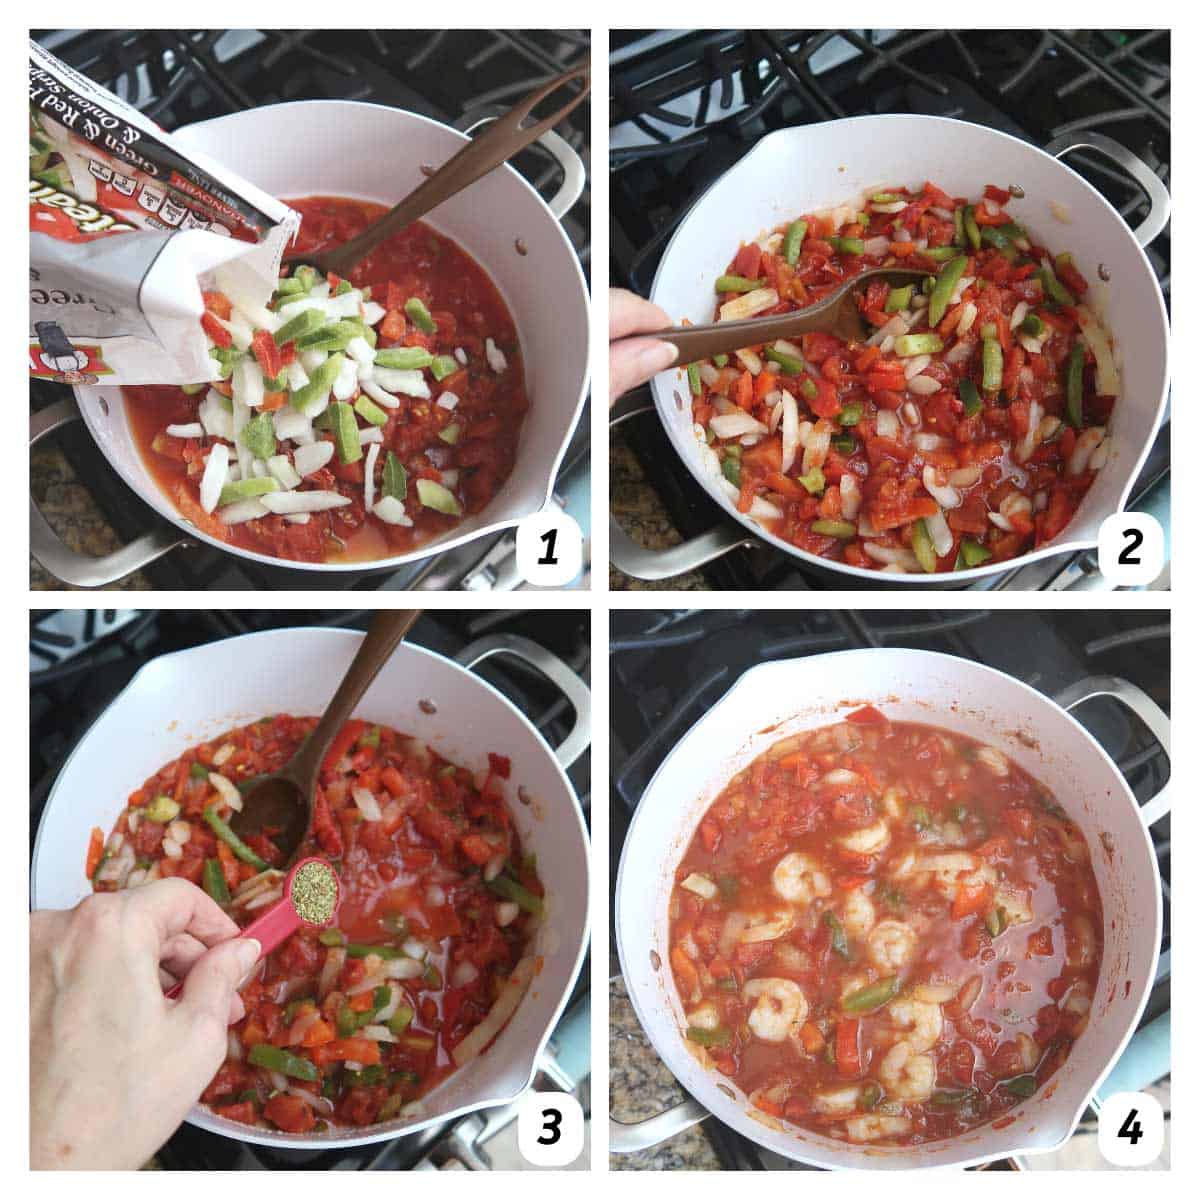 Four panel grid of process shots - gradually combining ingredients in a large pot over heat.